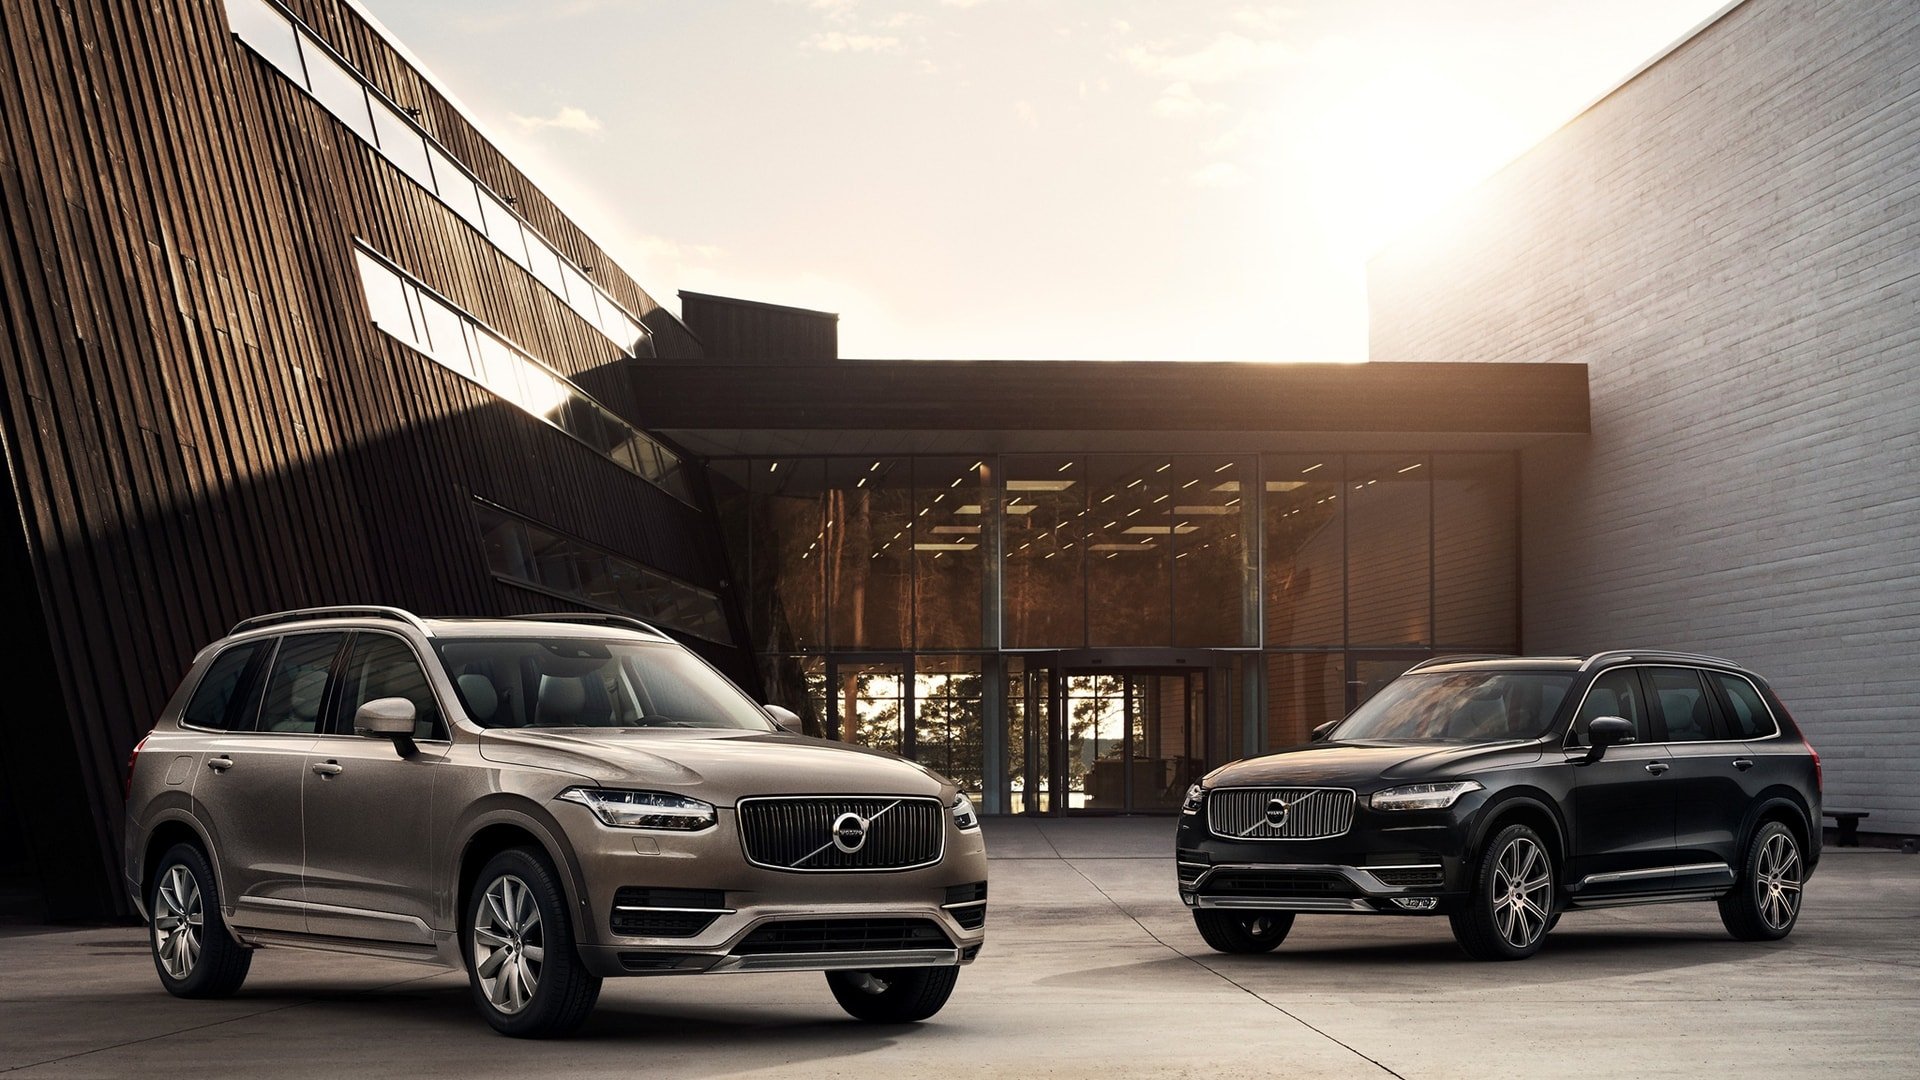 Free download Volvo Xc90 Wallpaper HD Photos Wallpapers and other ...